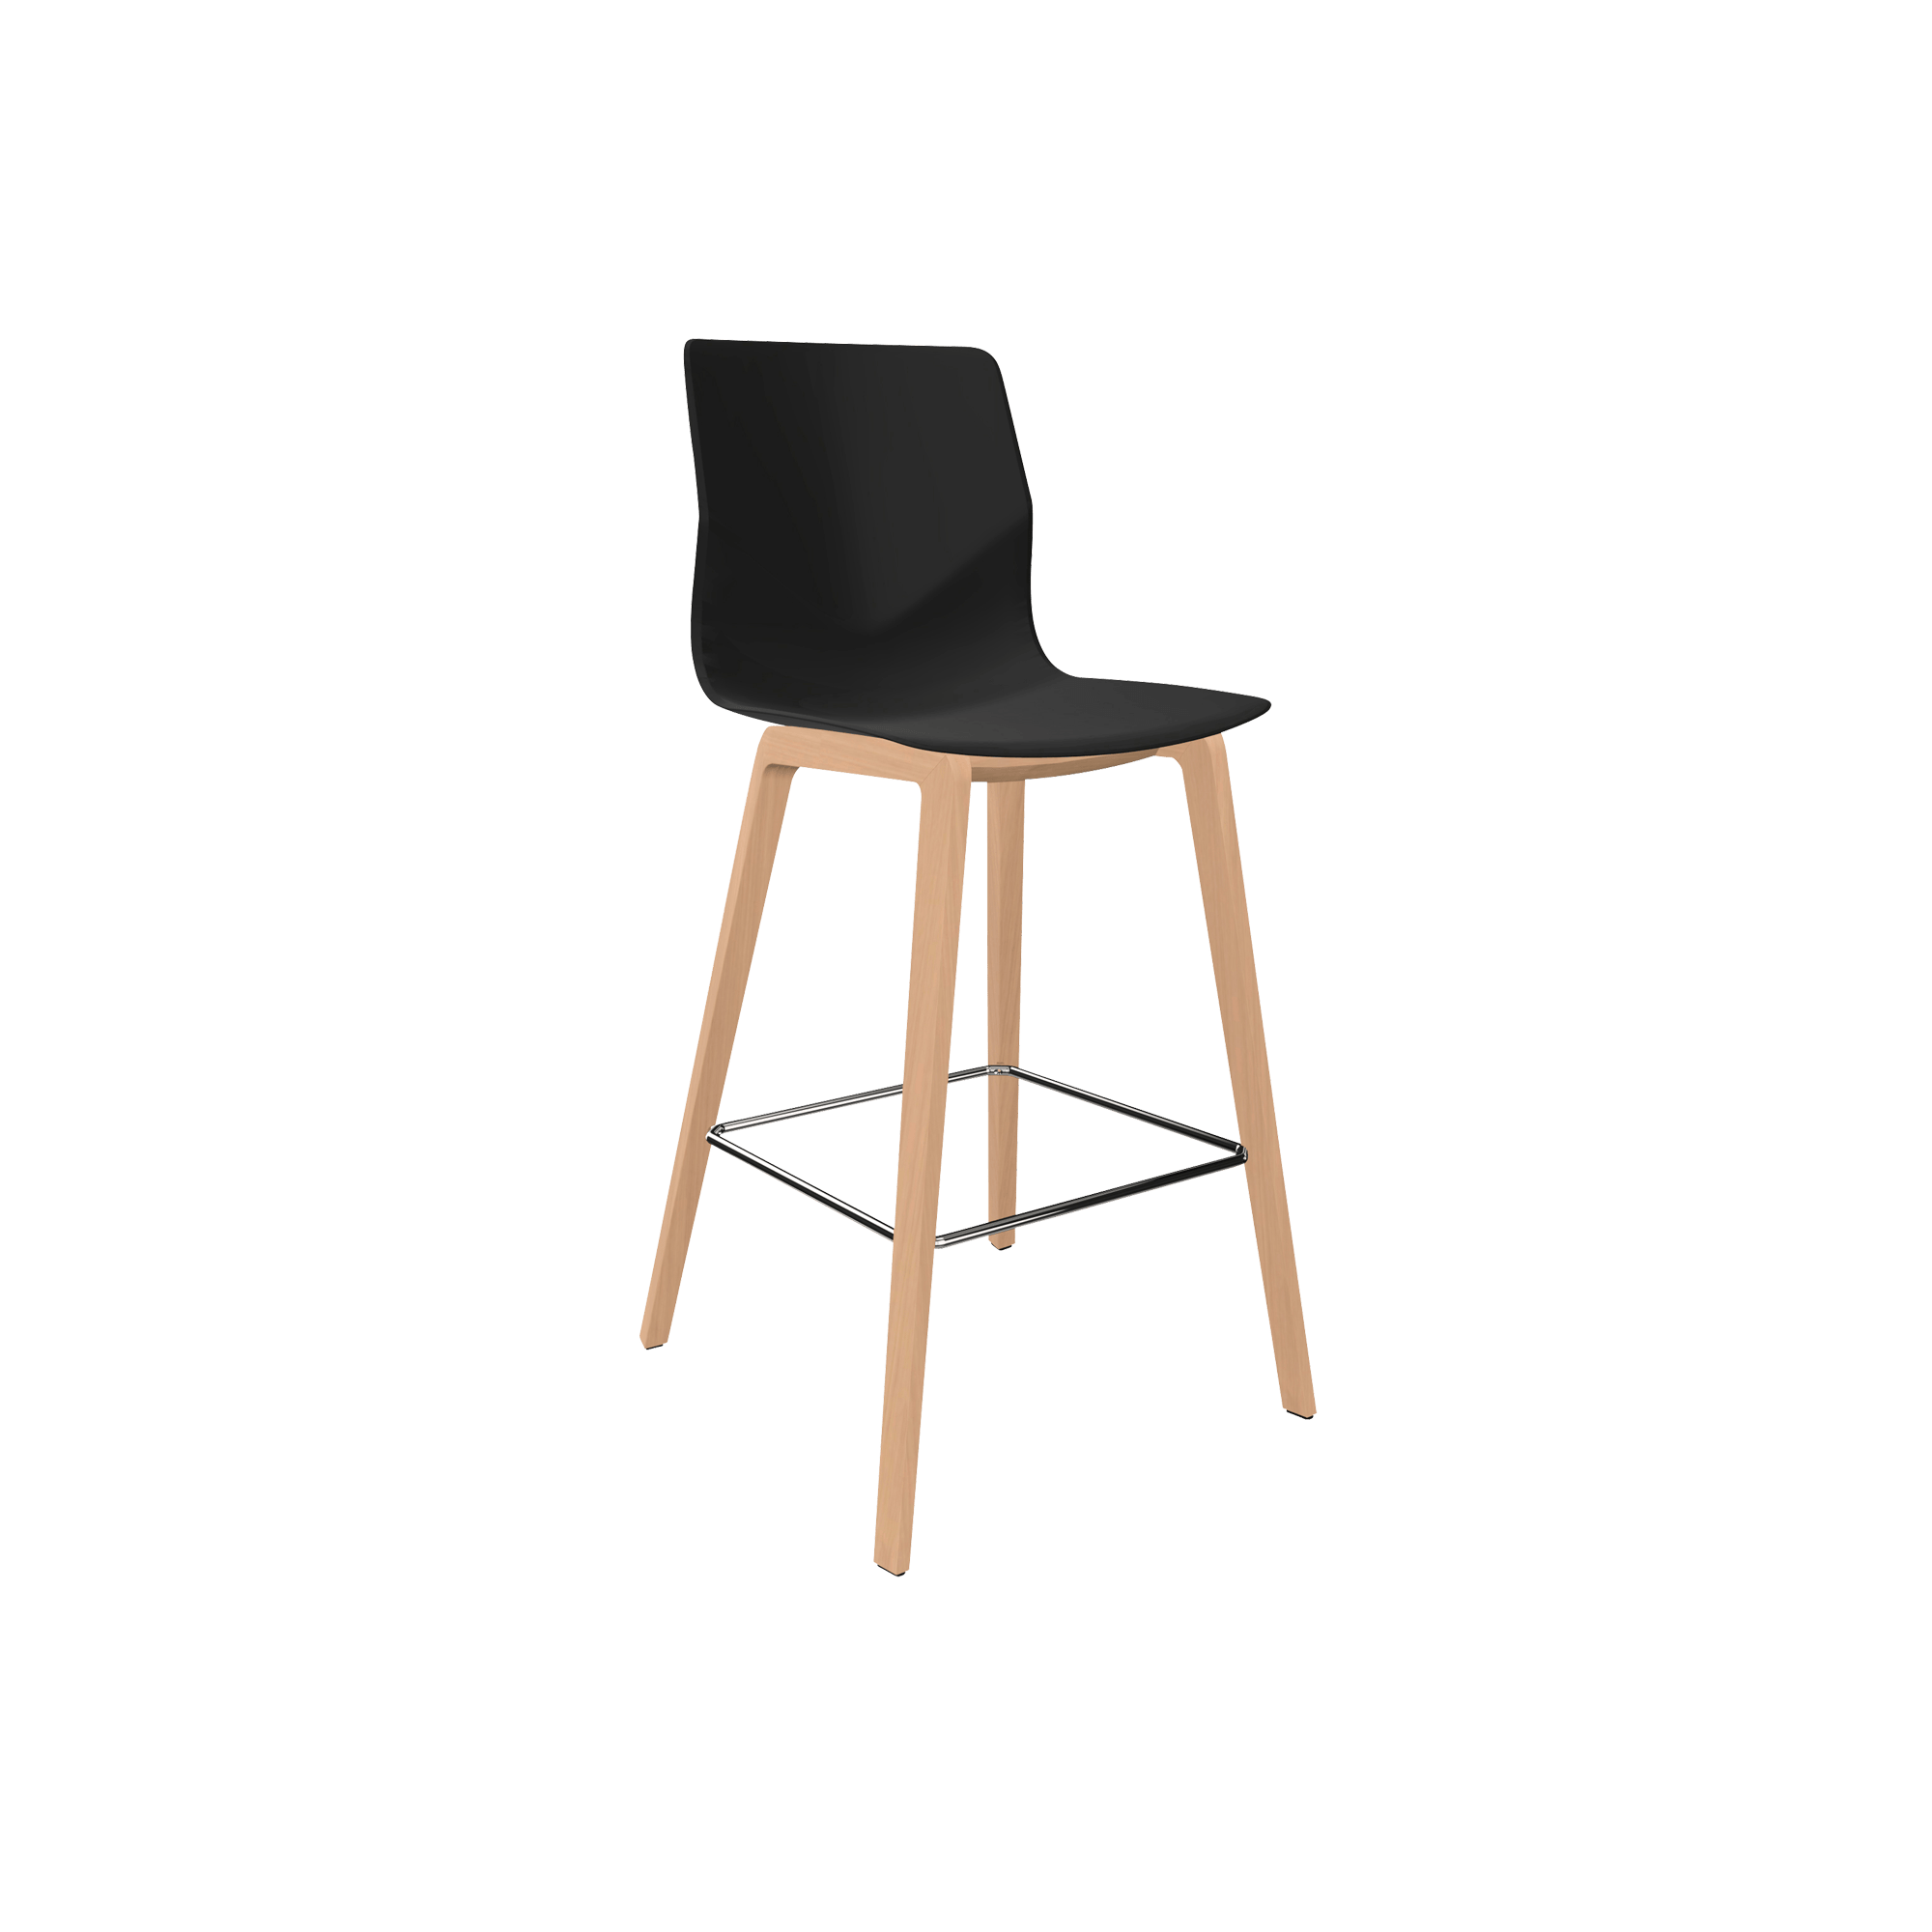 A black counter height chair with wooden legs